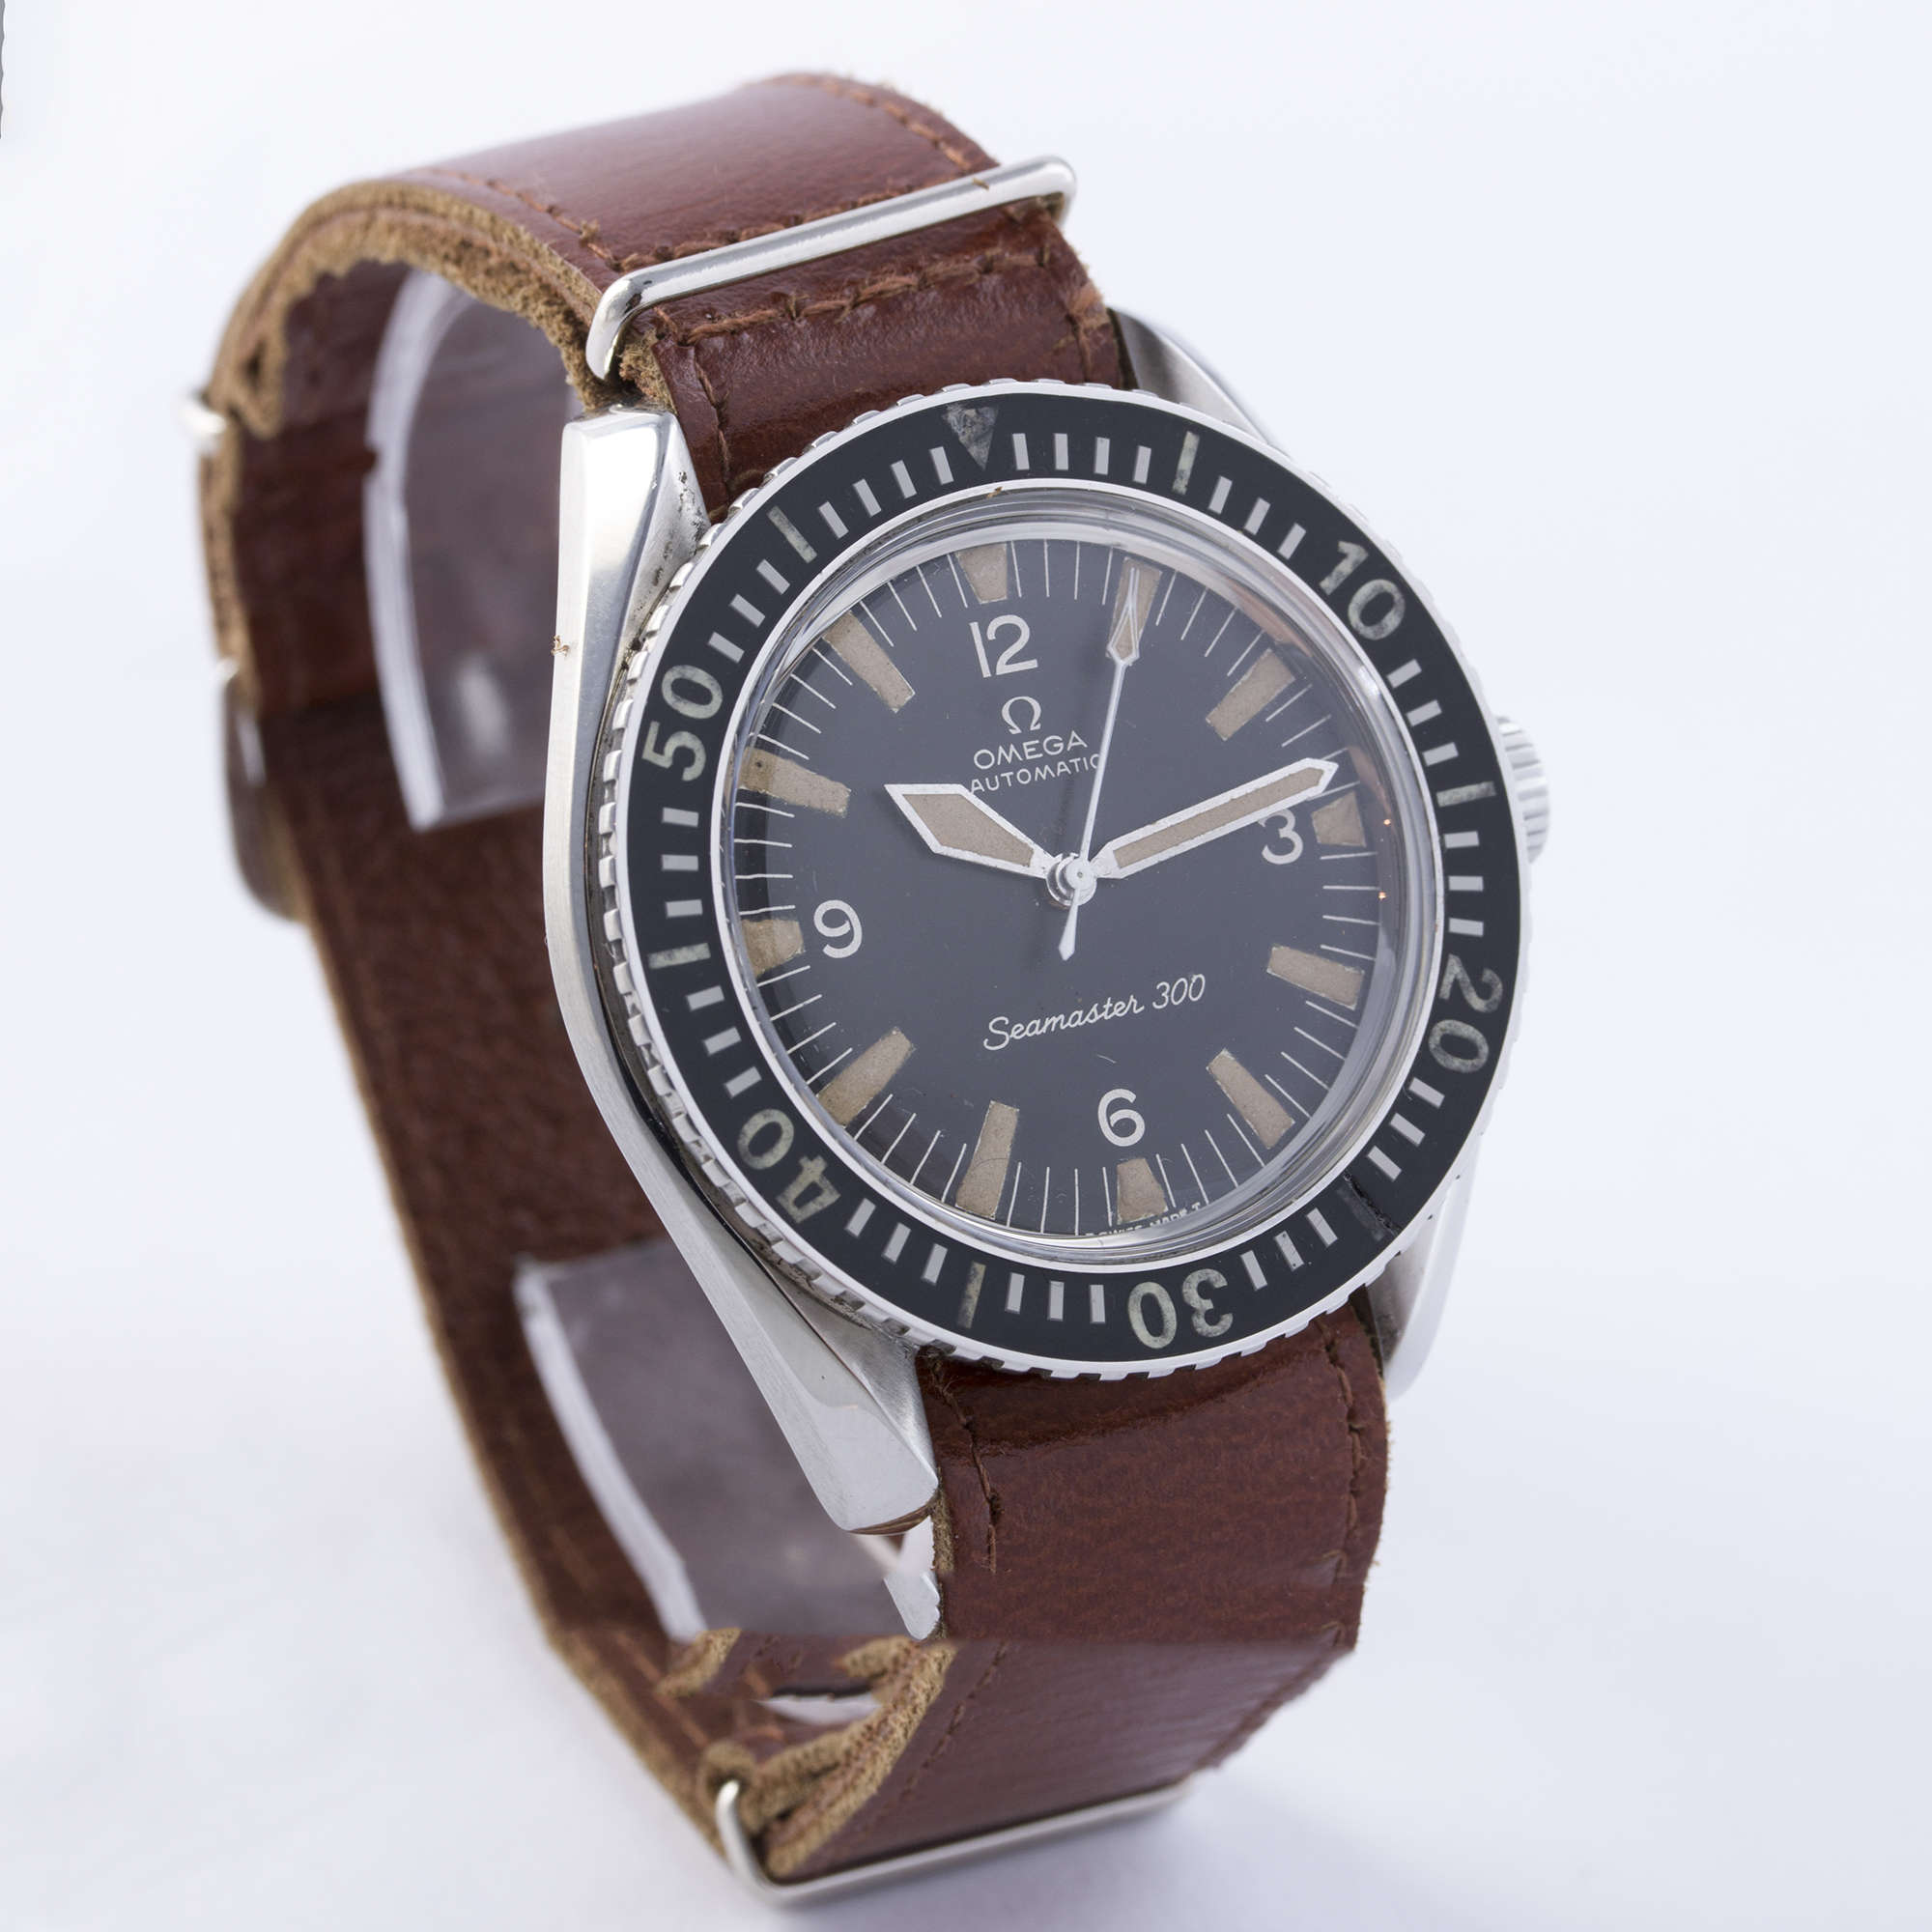 A GENTLEMAN'S STAINLESS STEEL OMEGA SEAMASTER 300 WRIST WATCH CIRCA 1967, REF. 165.024 D: Black dial - Image 5 of 8